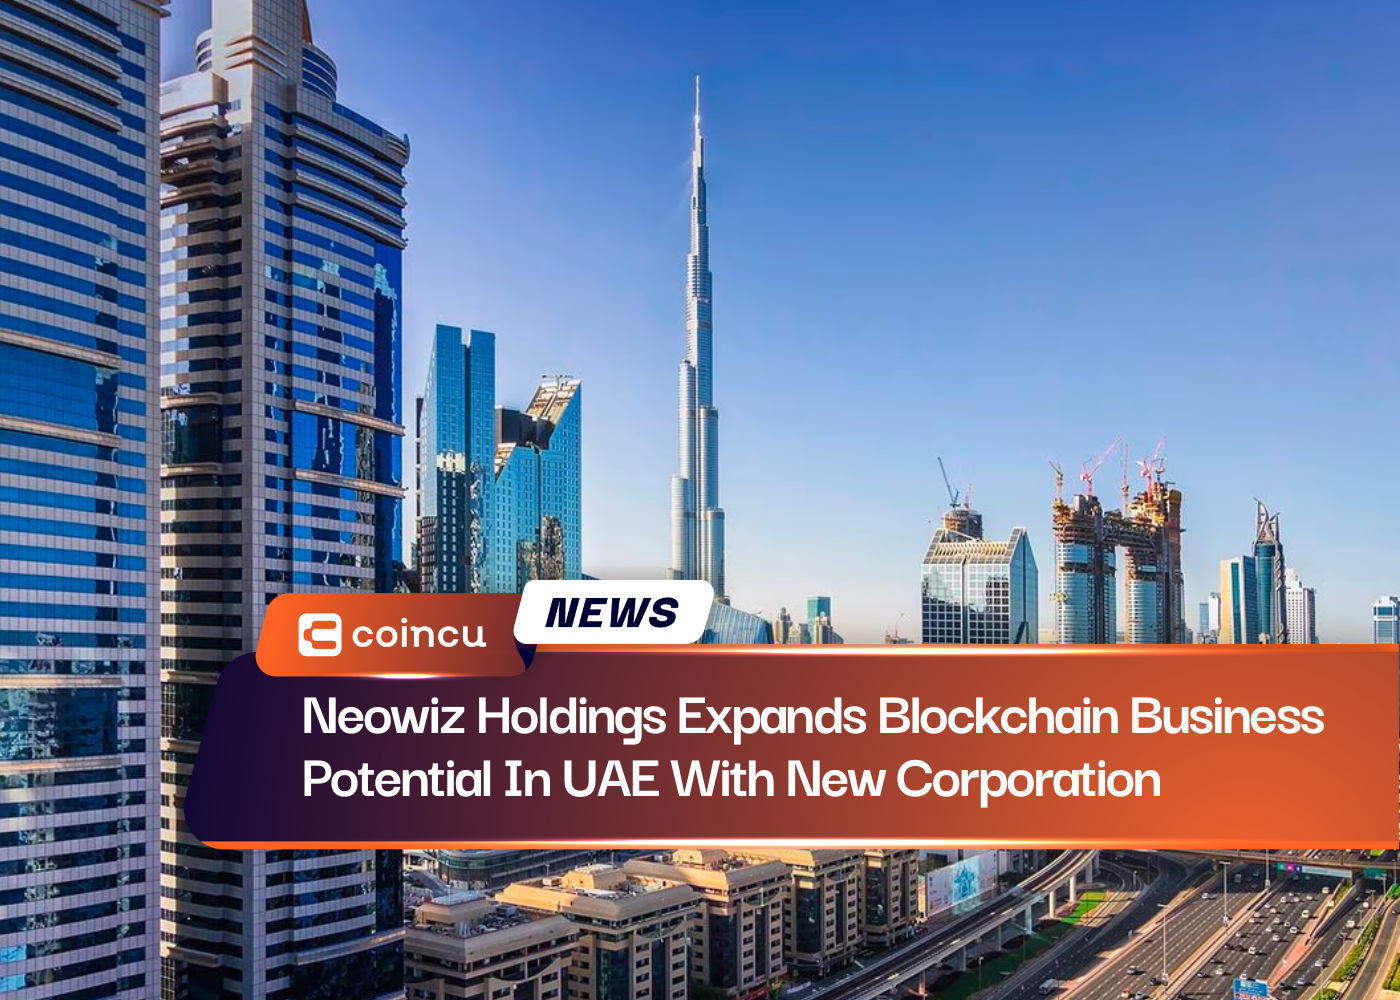 Neowiz Holdings Expands Blockchain Business Potential In UAE With New Corporation